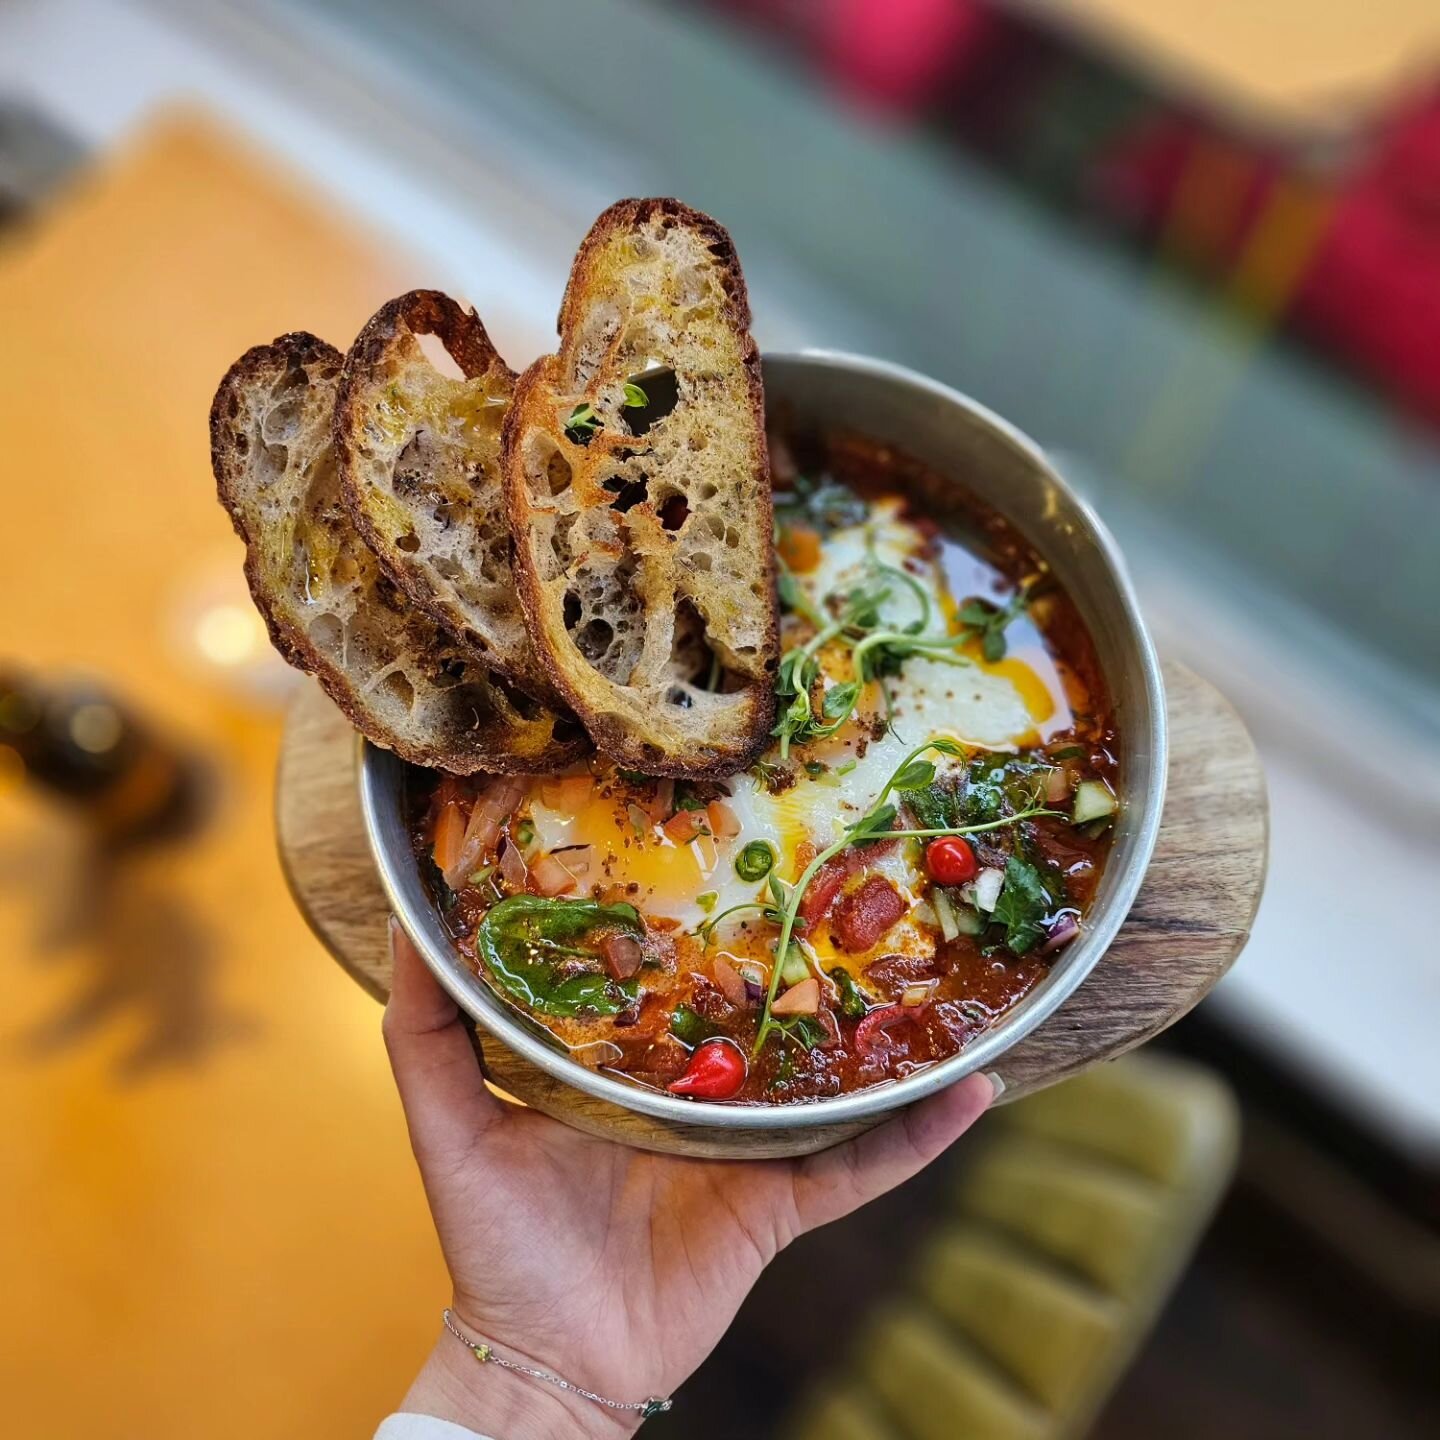 Shakshuka💫 isnt she pretty, bursting with flavours from North Africa and the Middle East spice trail. We serve our shak with dukkah fried eggs and lightly toasted zaatar sourdough. You really feel at home with this dish, and every bite takes you fur